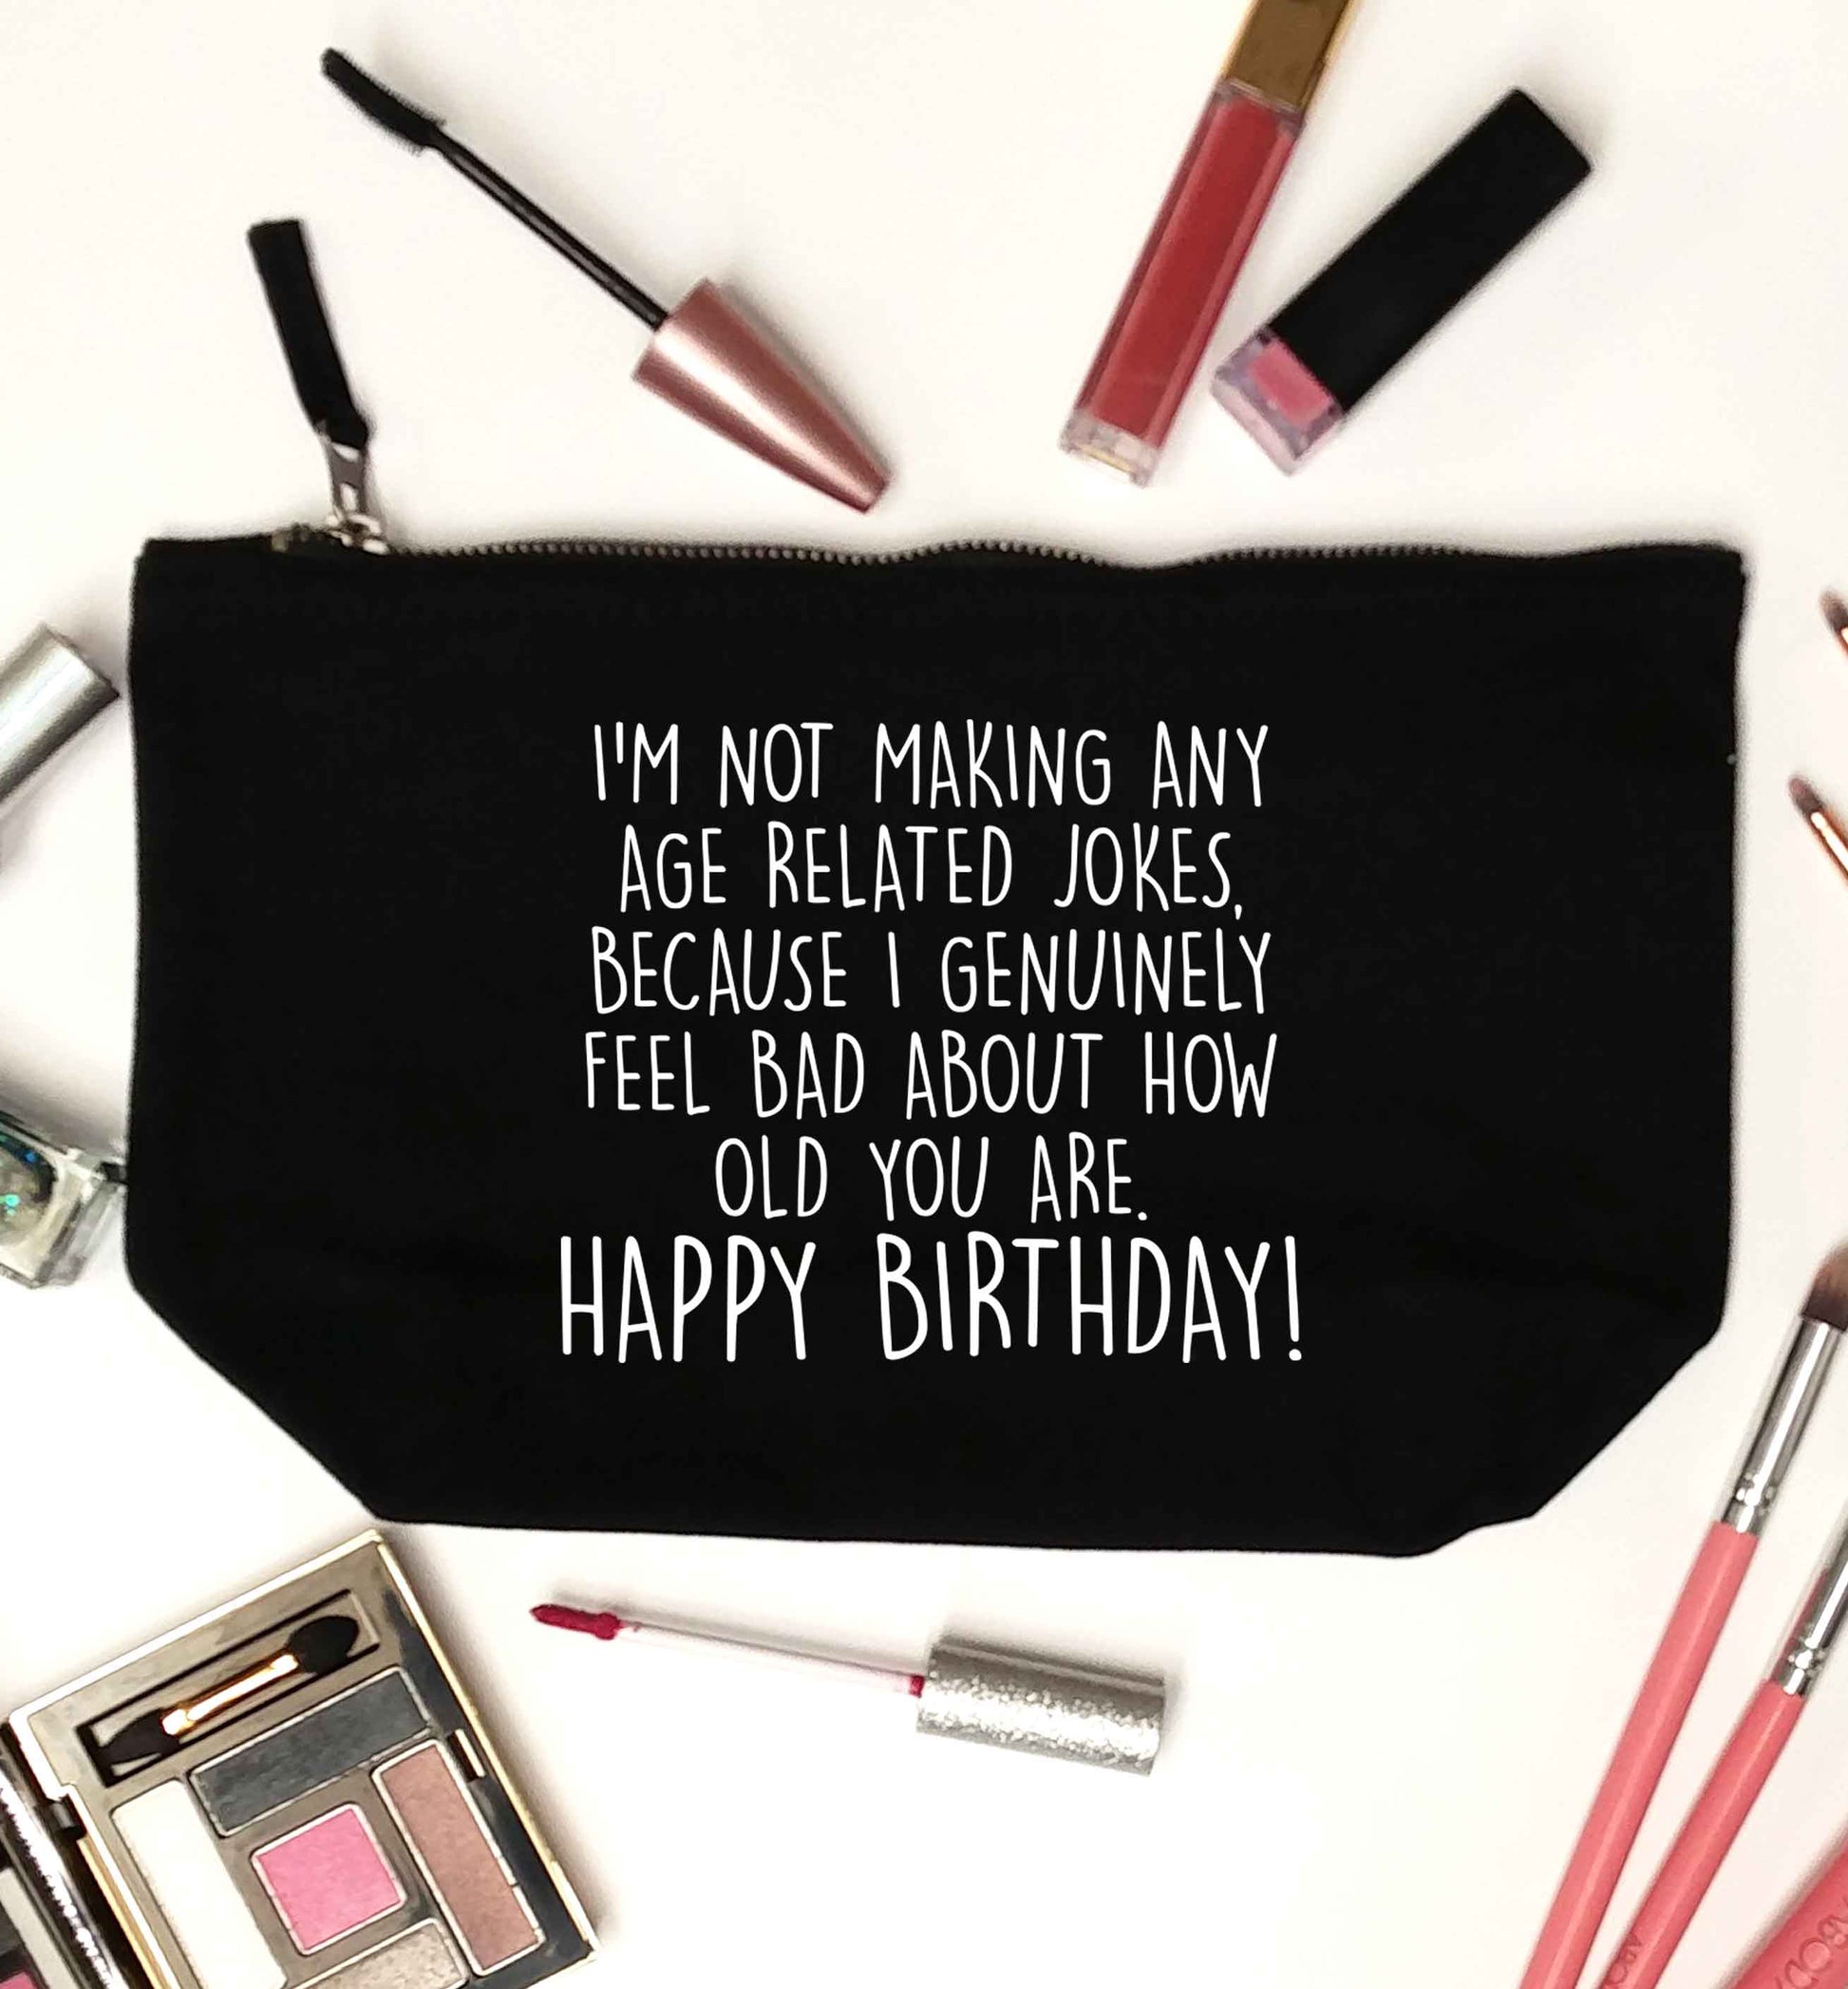 I'm not making any age related jokes because I genuinely feel bad for how old you are black makeup bag